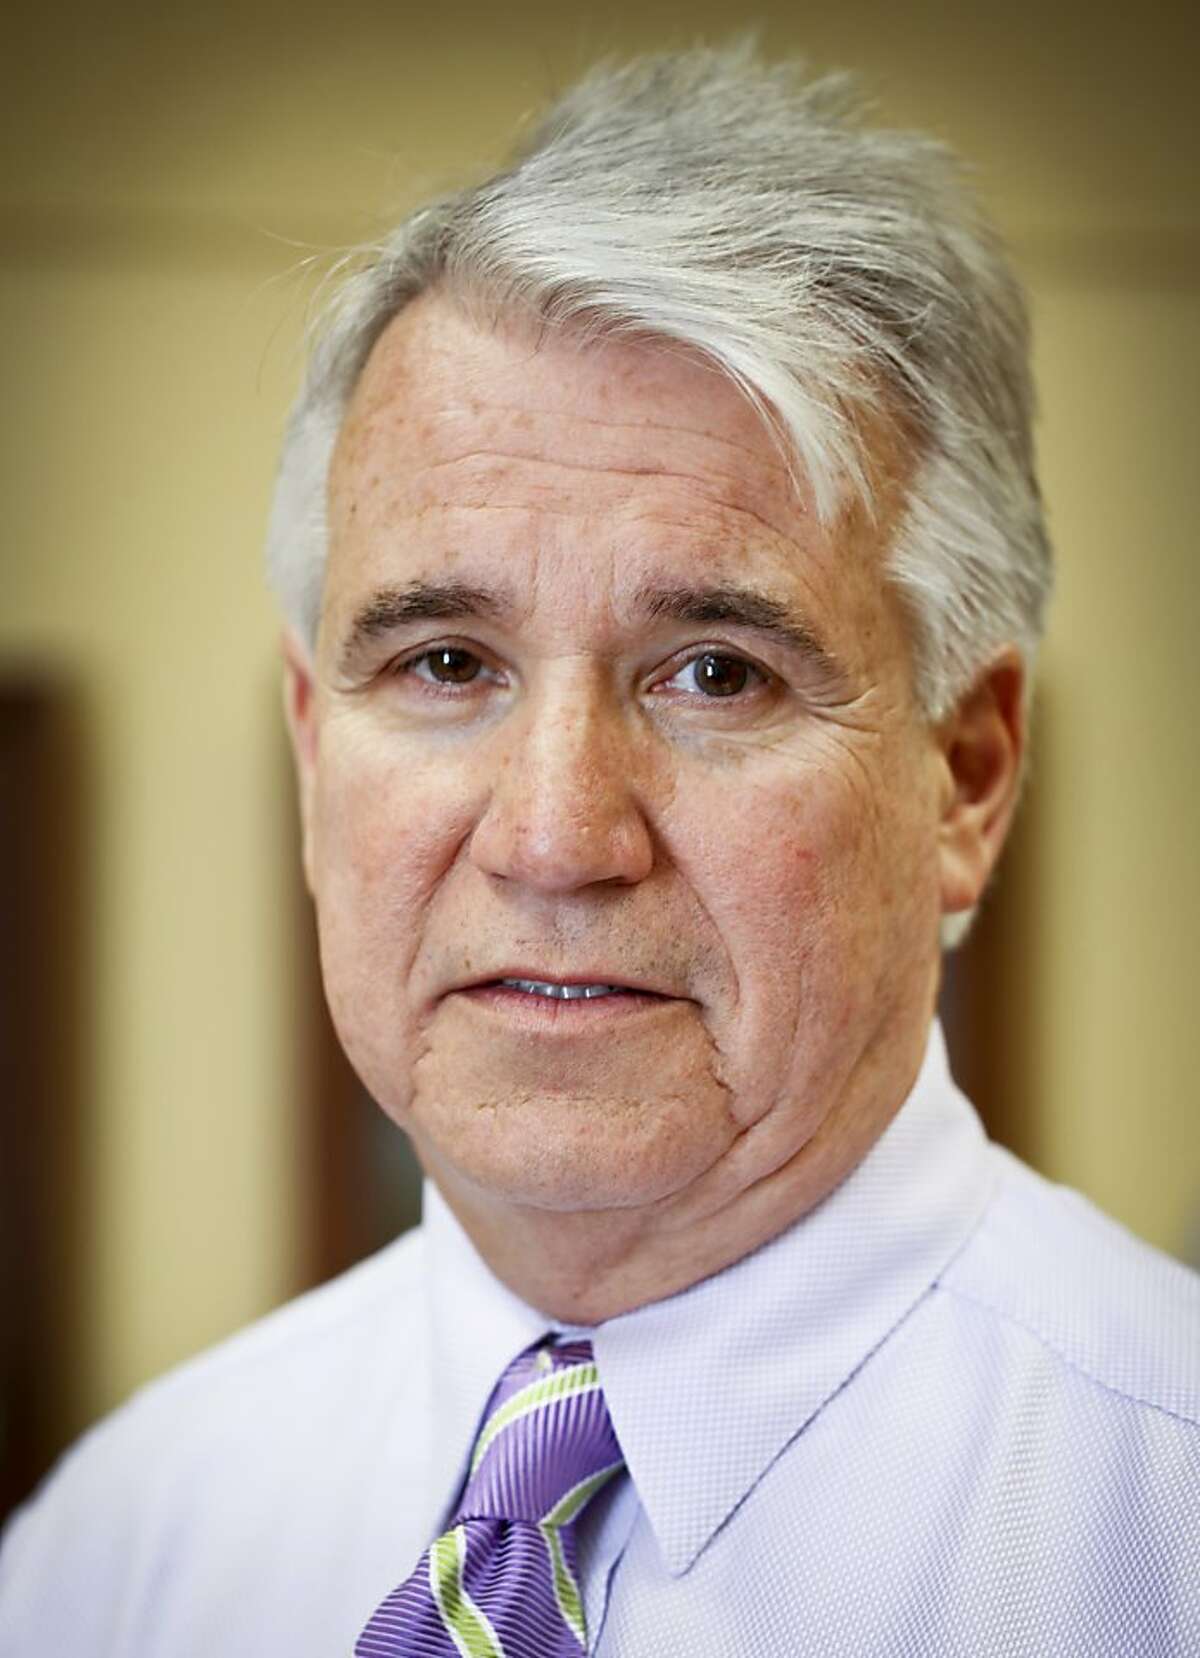 San Francisco District Attorney George Gascon is seen on Friday, March 22, 2013 at the Hall of Justice in San Francisco, Calif.